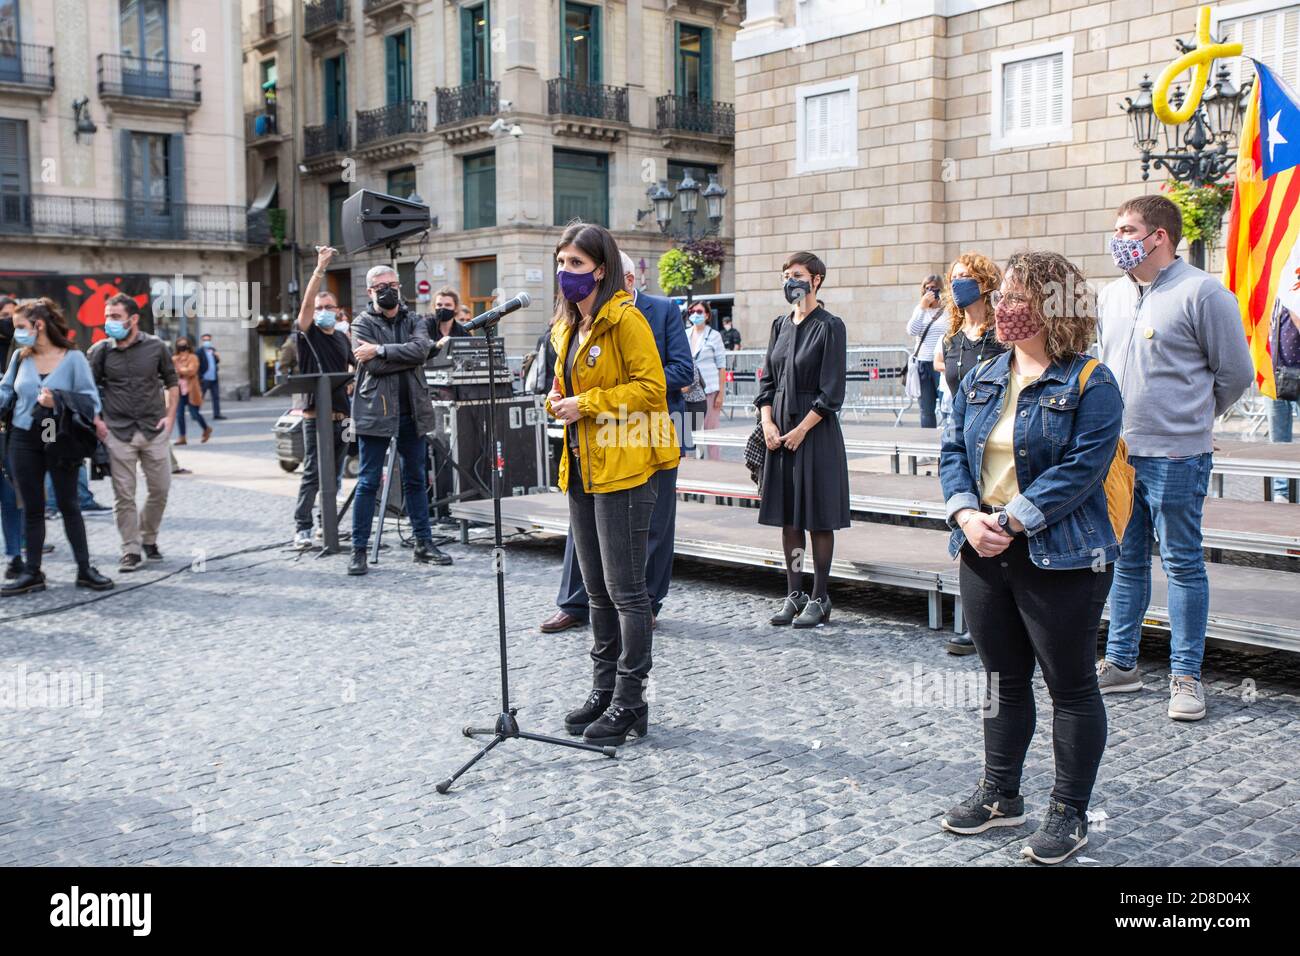 Barcelona, Spain. 2020.10.28. Some Pro-independence Political parties and Entities gather in the Sant Jaume square. Stock Photo